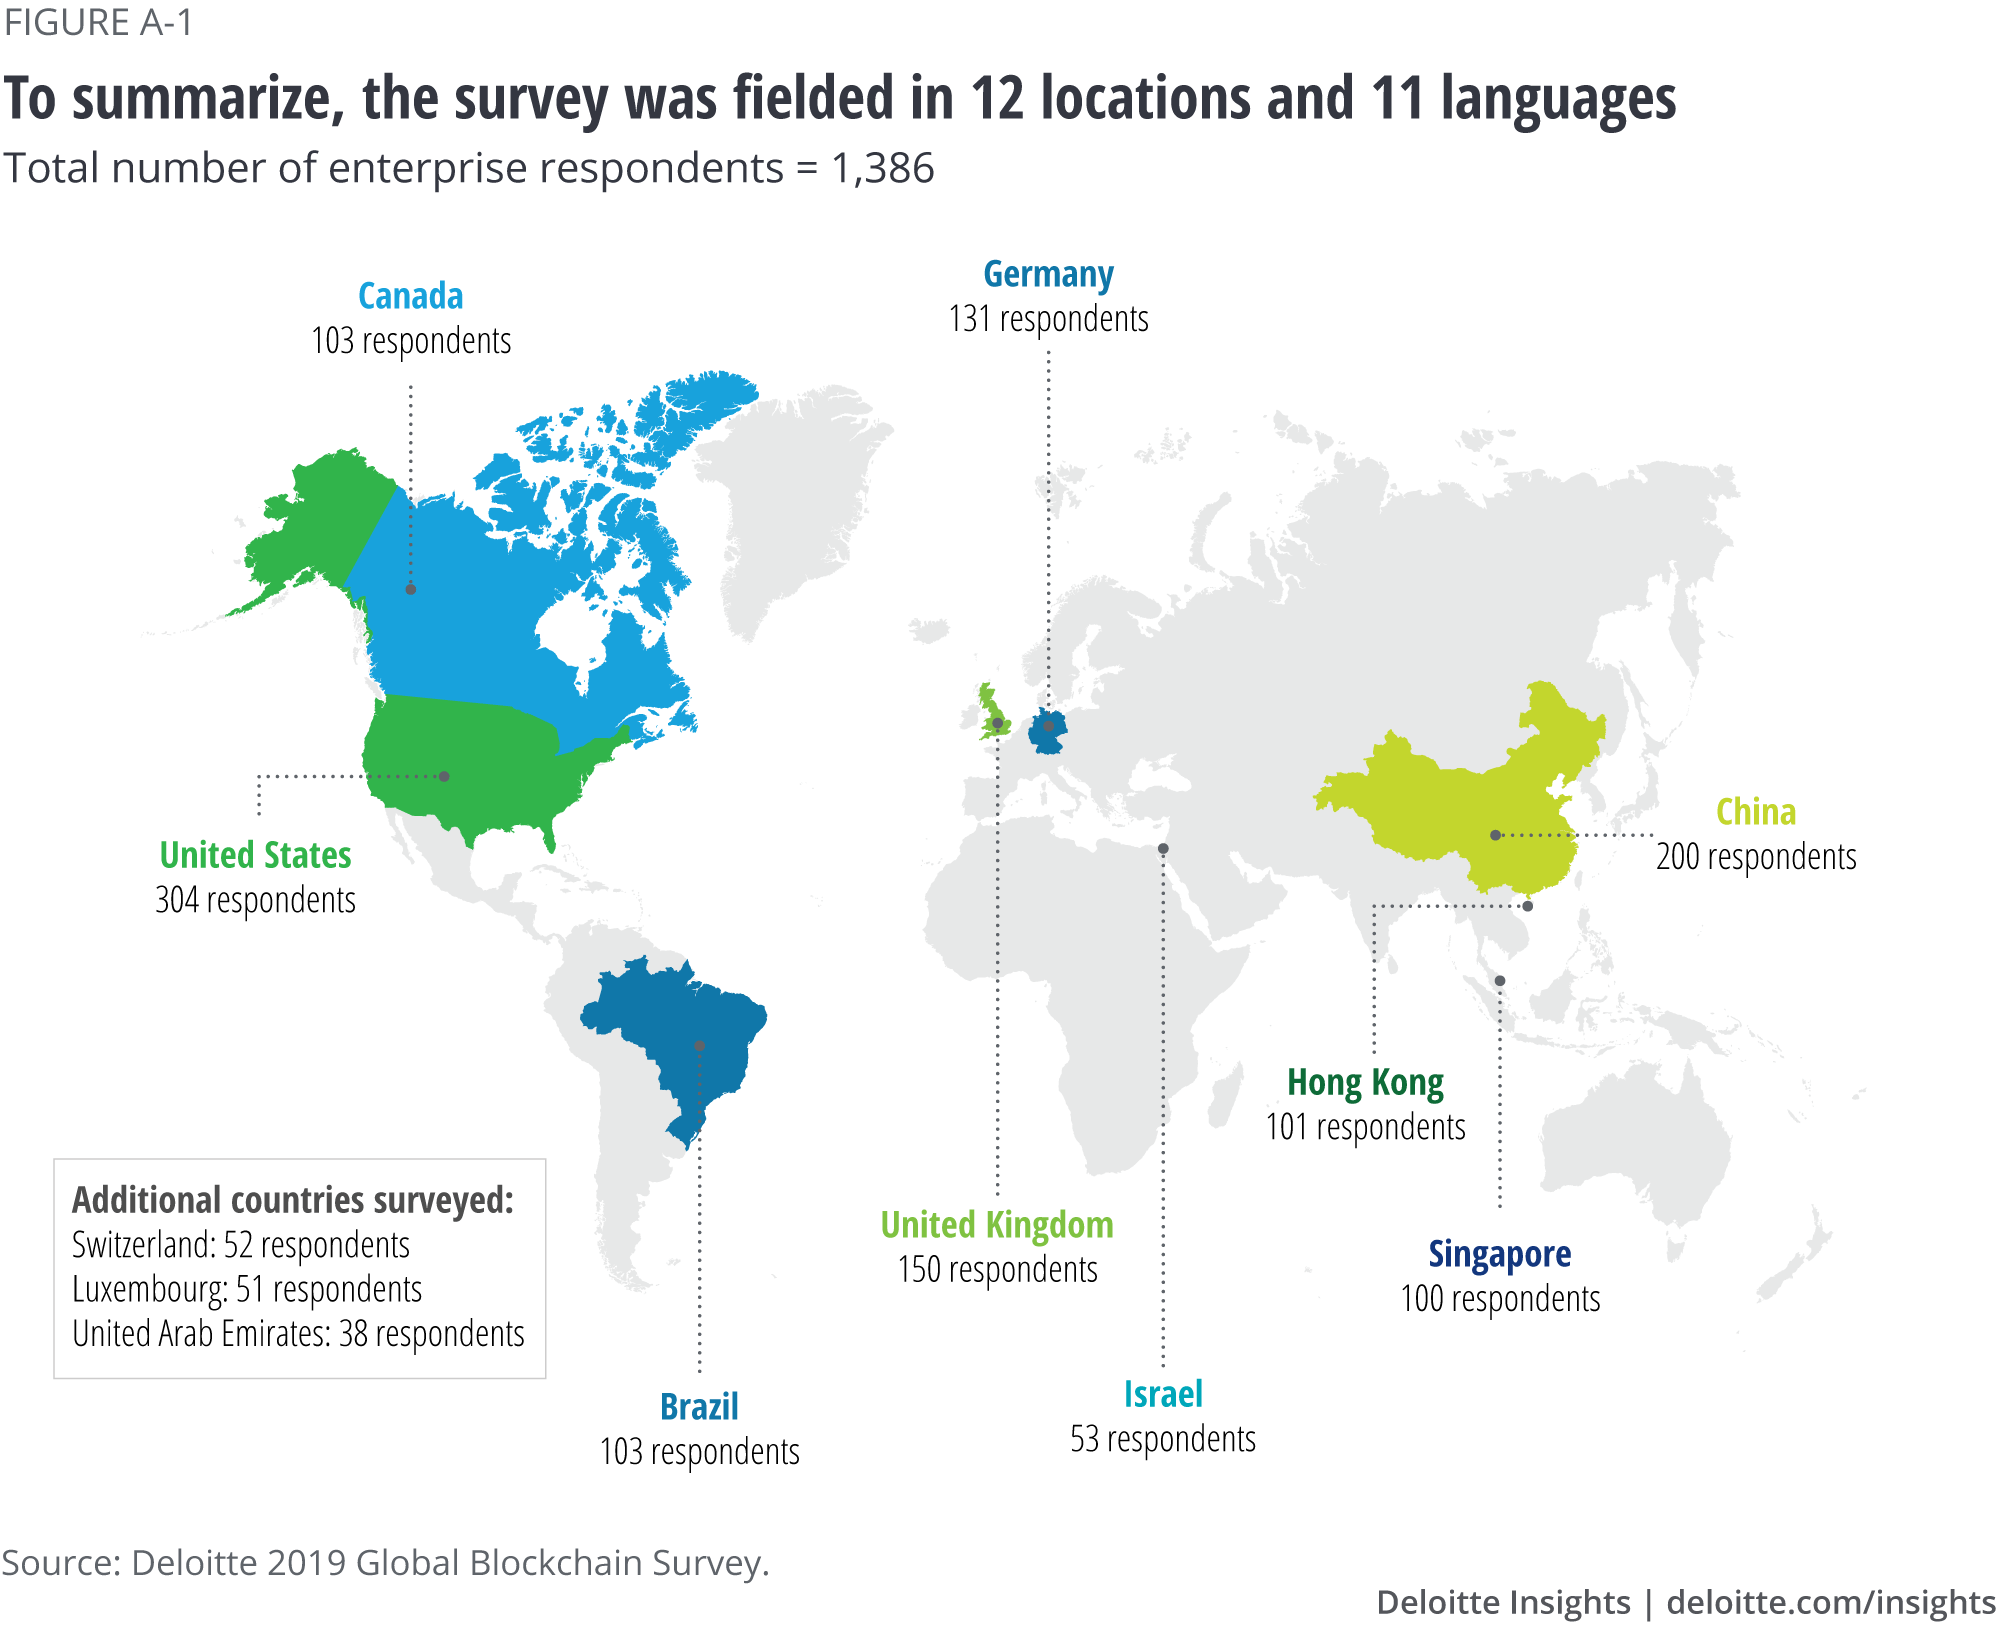 The survey was fielded in 12 countries and 11 languages